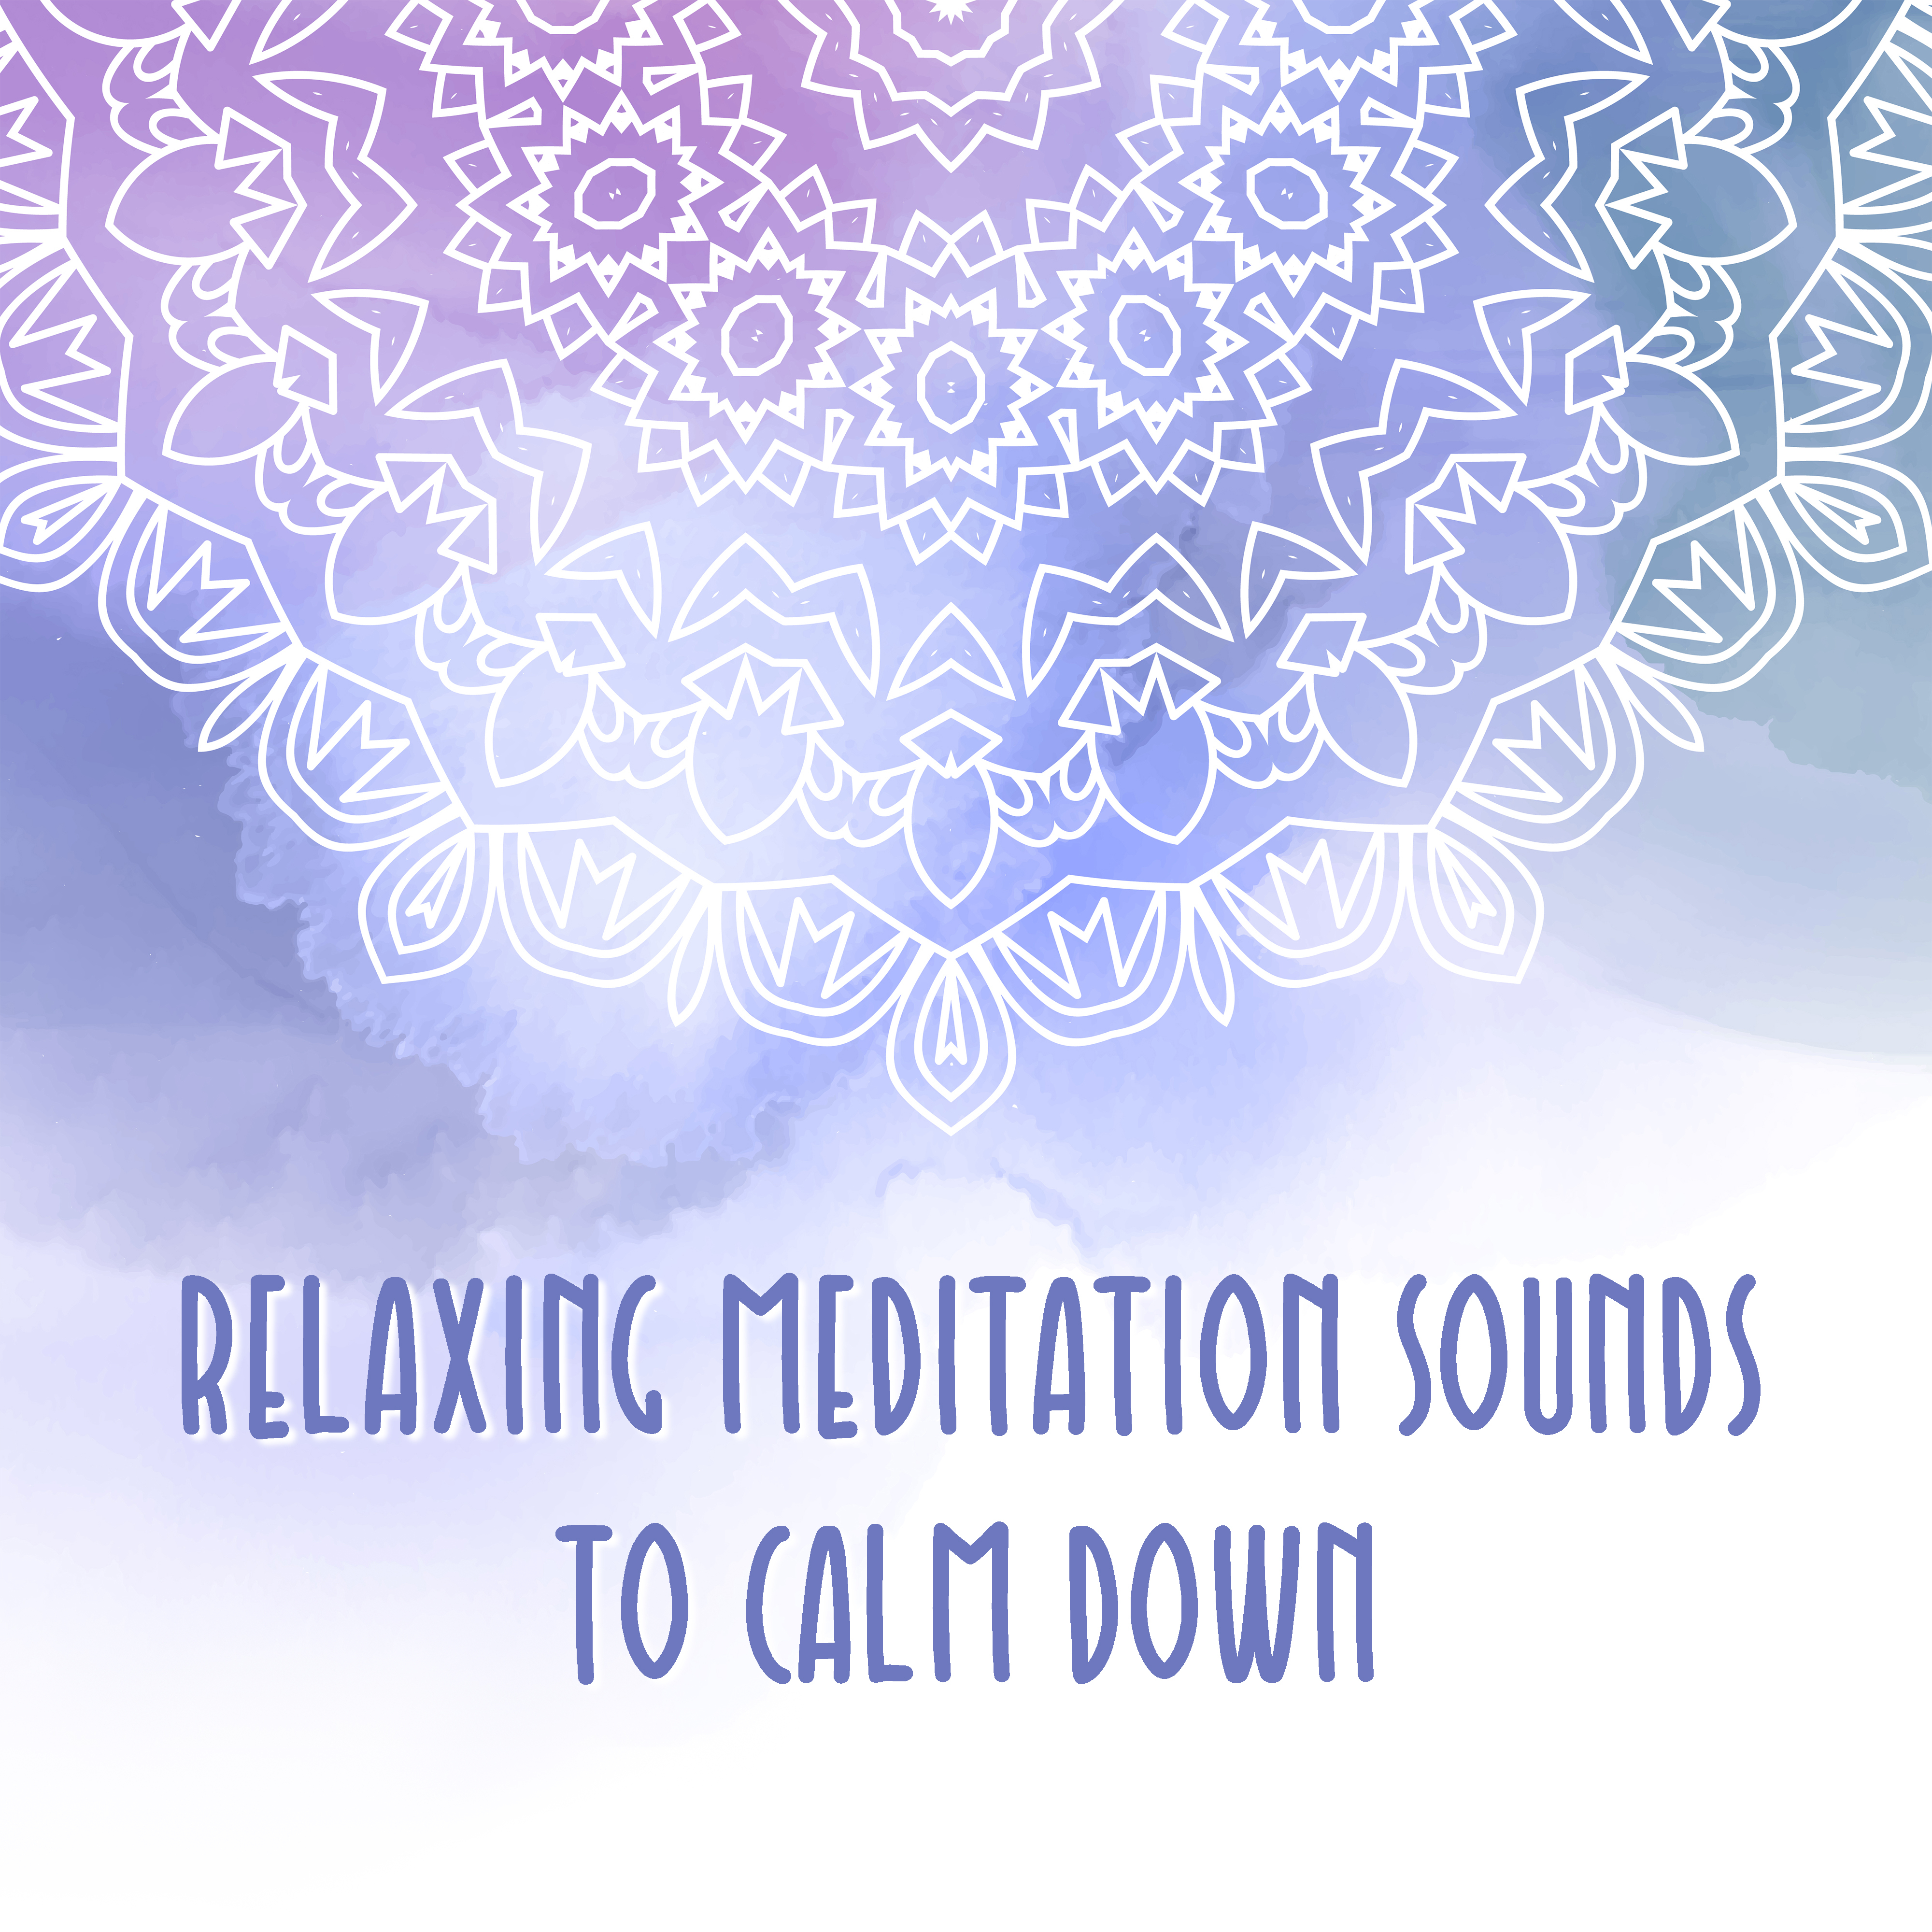 Relaxing Meditation Sounds to Calm Down